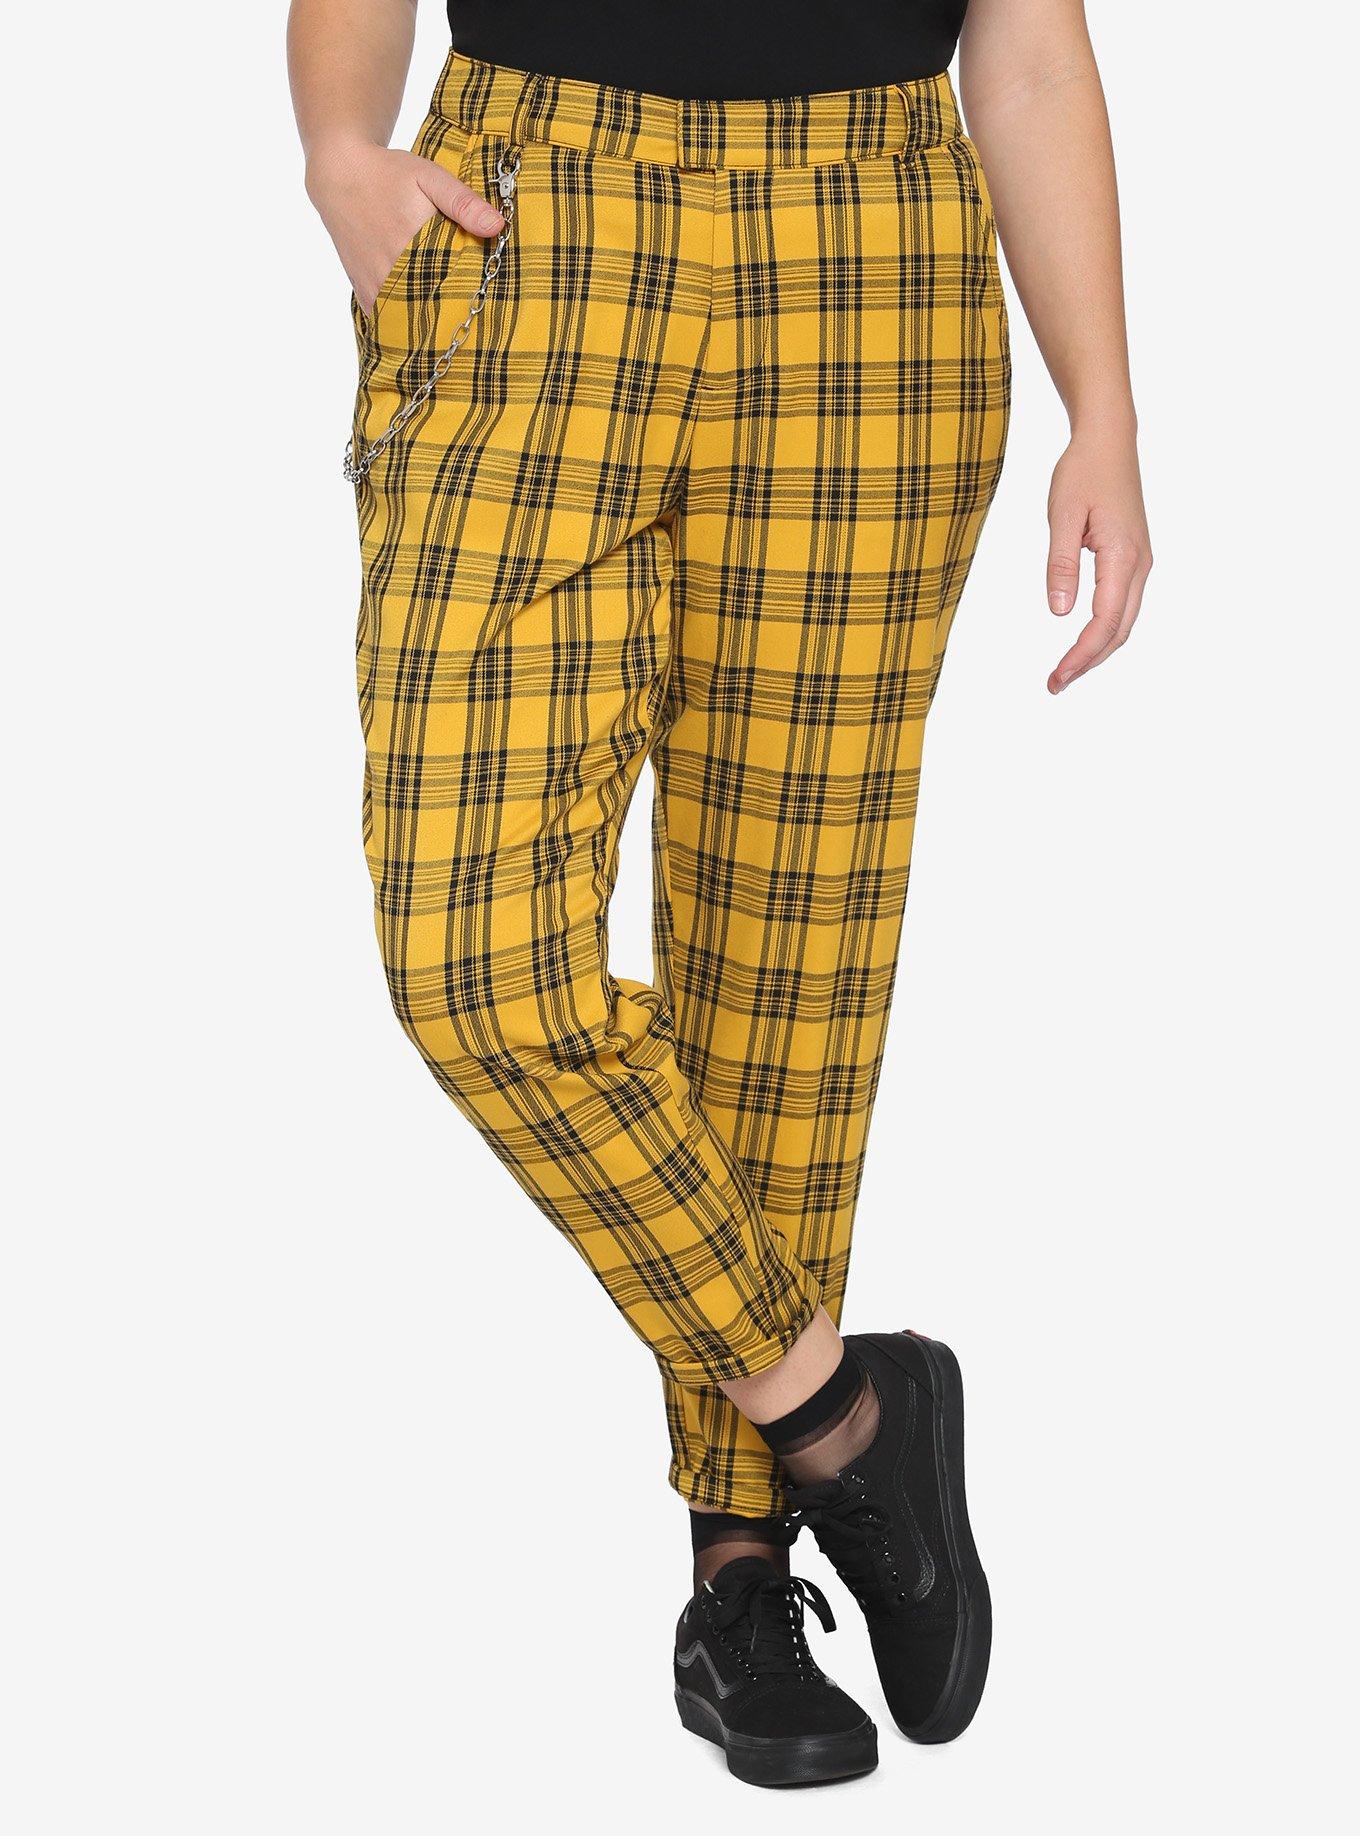 Yellow Fighter All-Over Print Plus Size Leggings Halloween Costume Pants